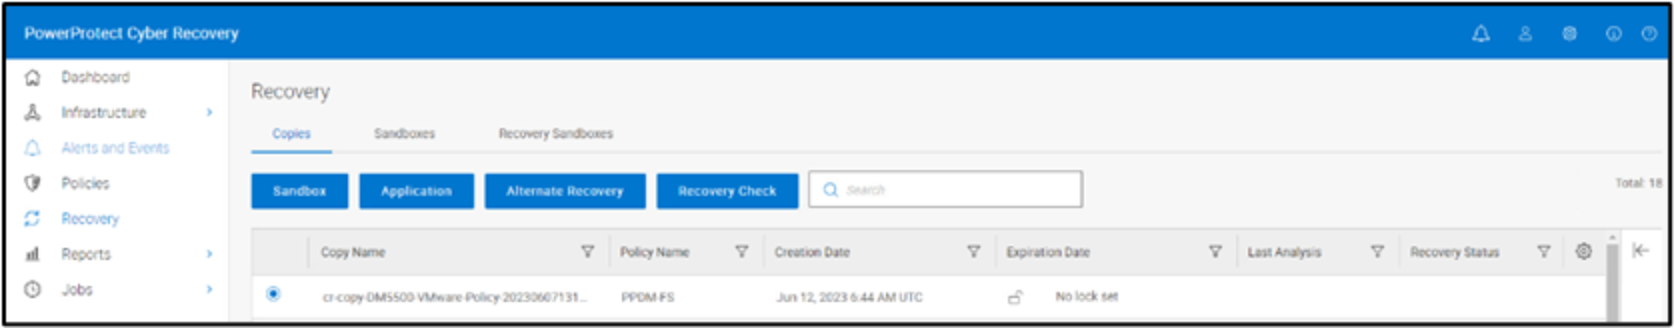 The image displays the activity of selecting a good copy for restore in Cyber Recovery UI.